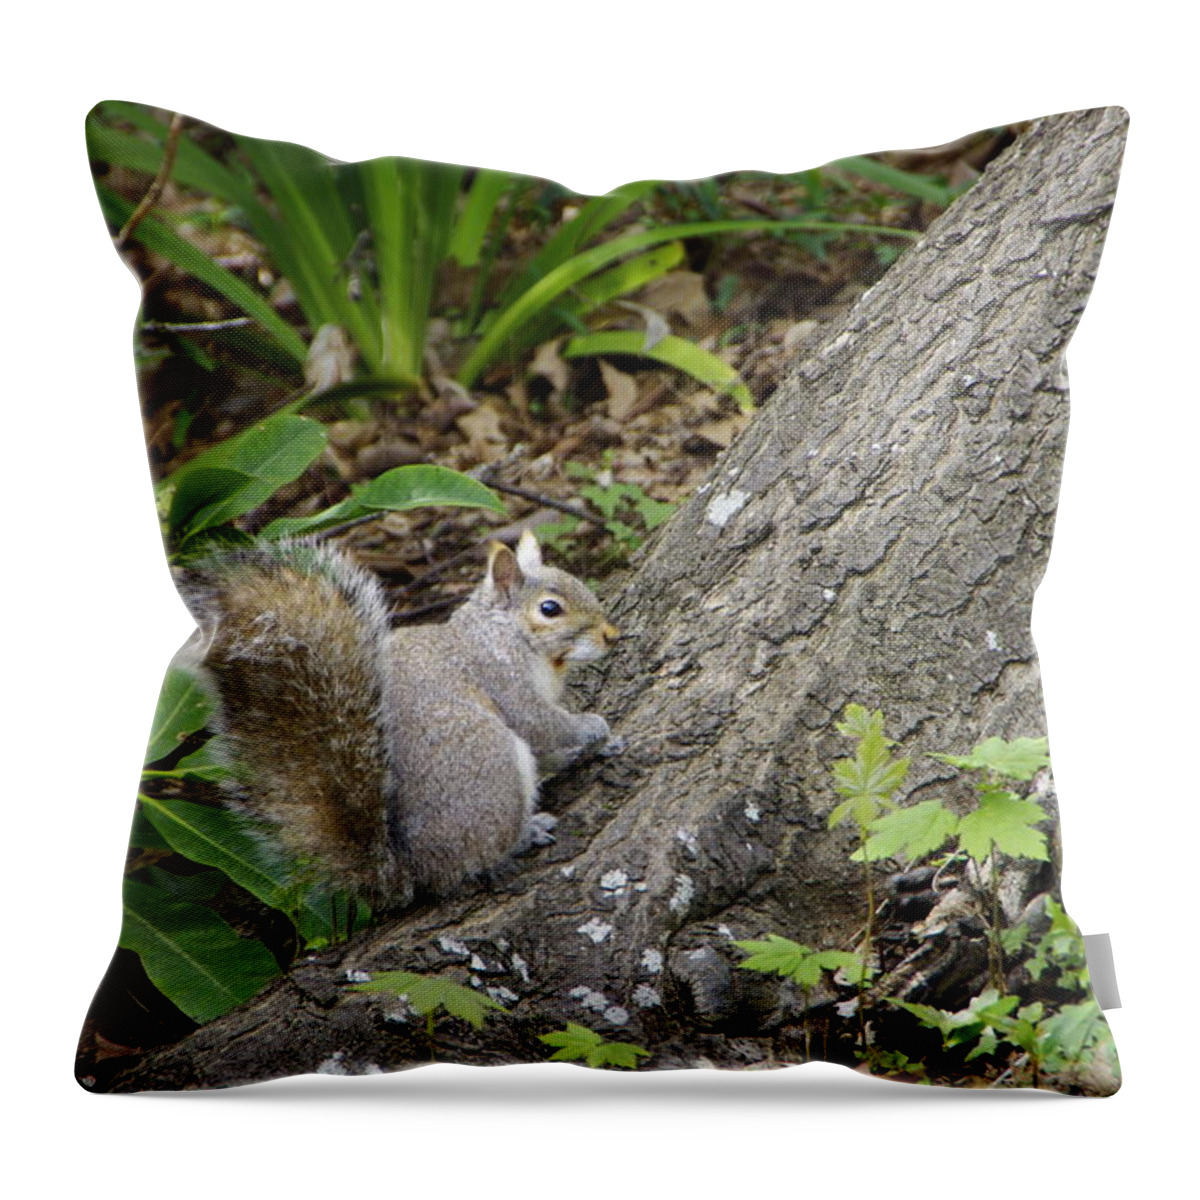 Squirrel Throw Pillow featuring the photograph Friendly Squirrel by Marilyn Wilson